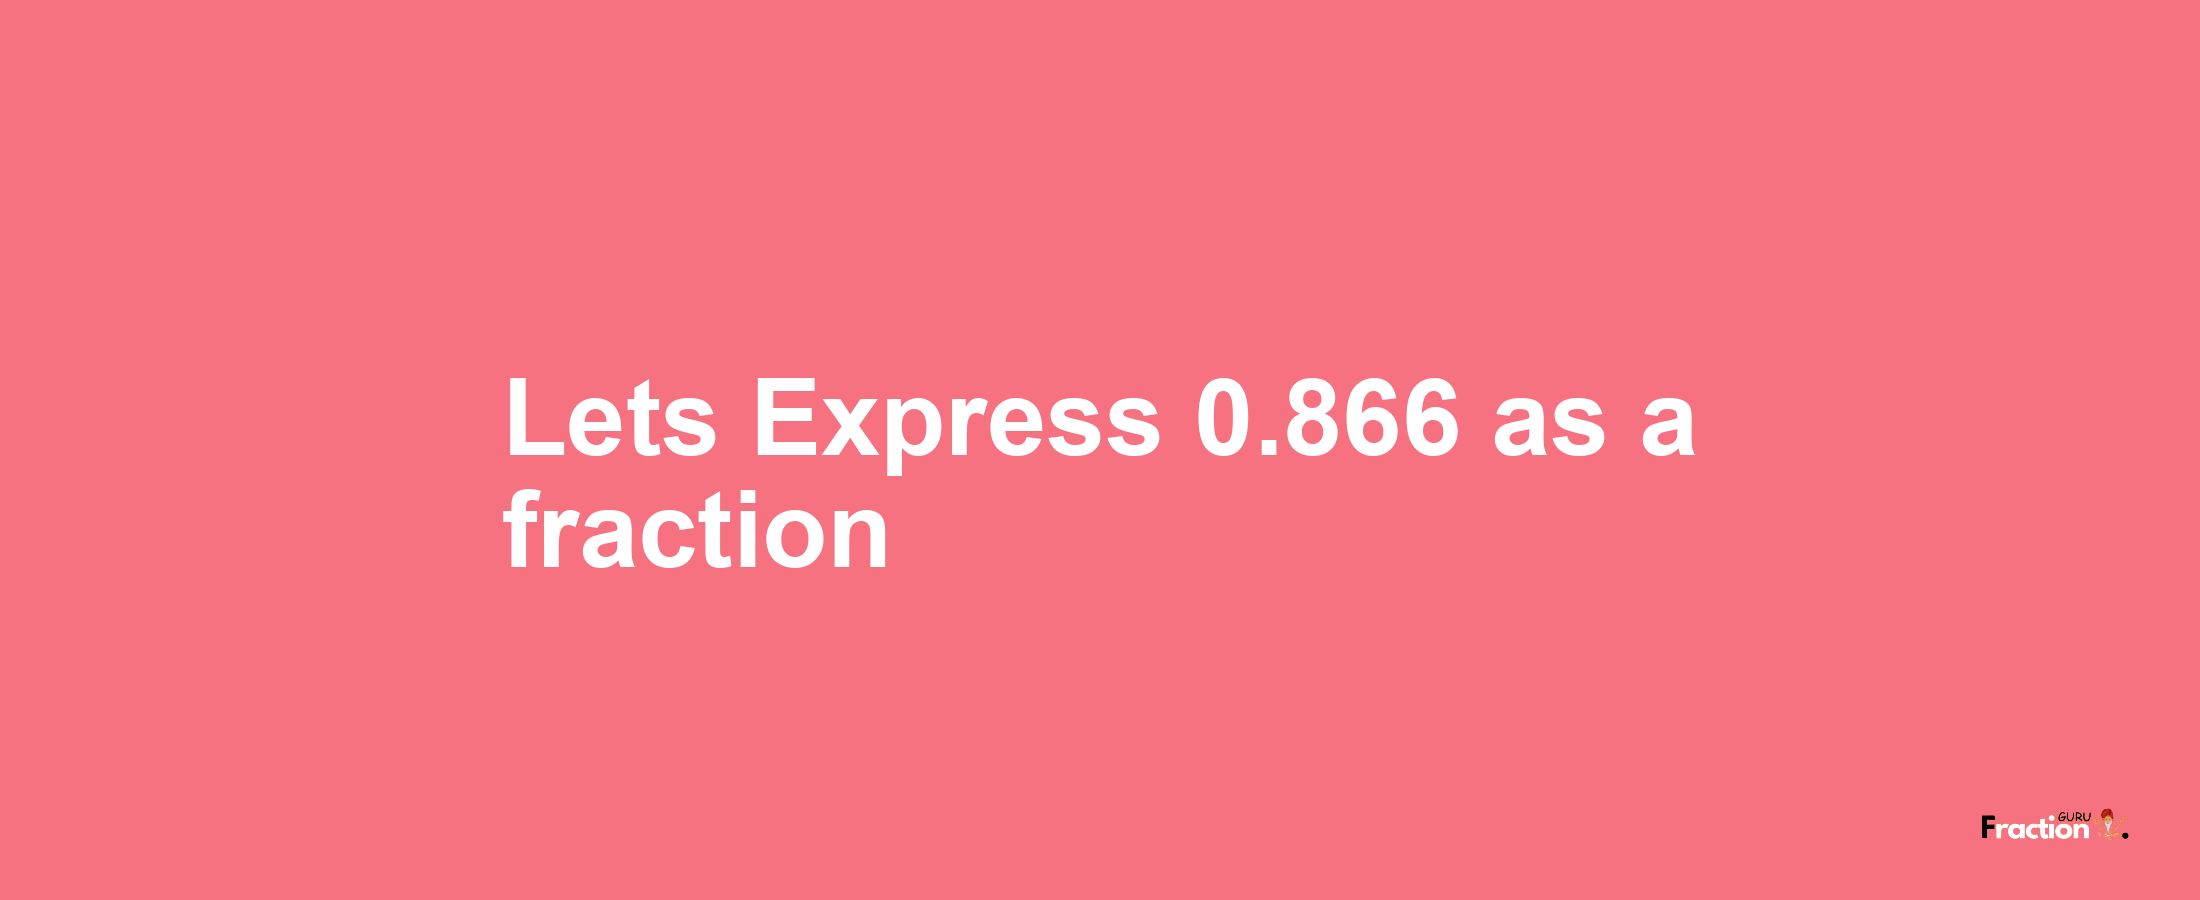 Lets Express 0.866 as afraction